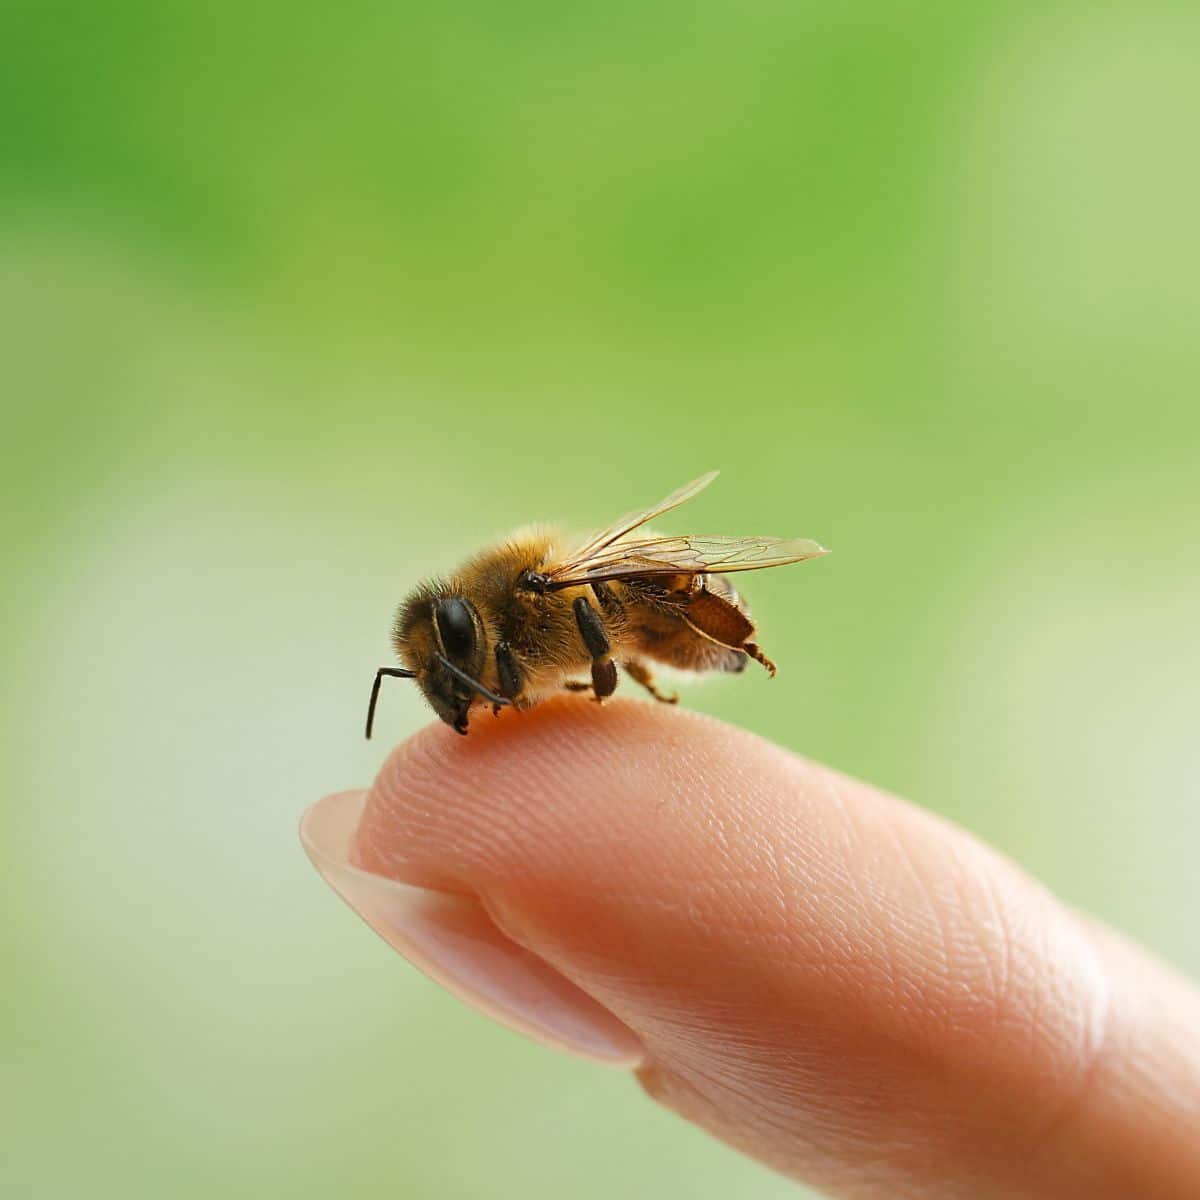 spiritual meaning of getting stung by a bee